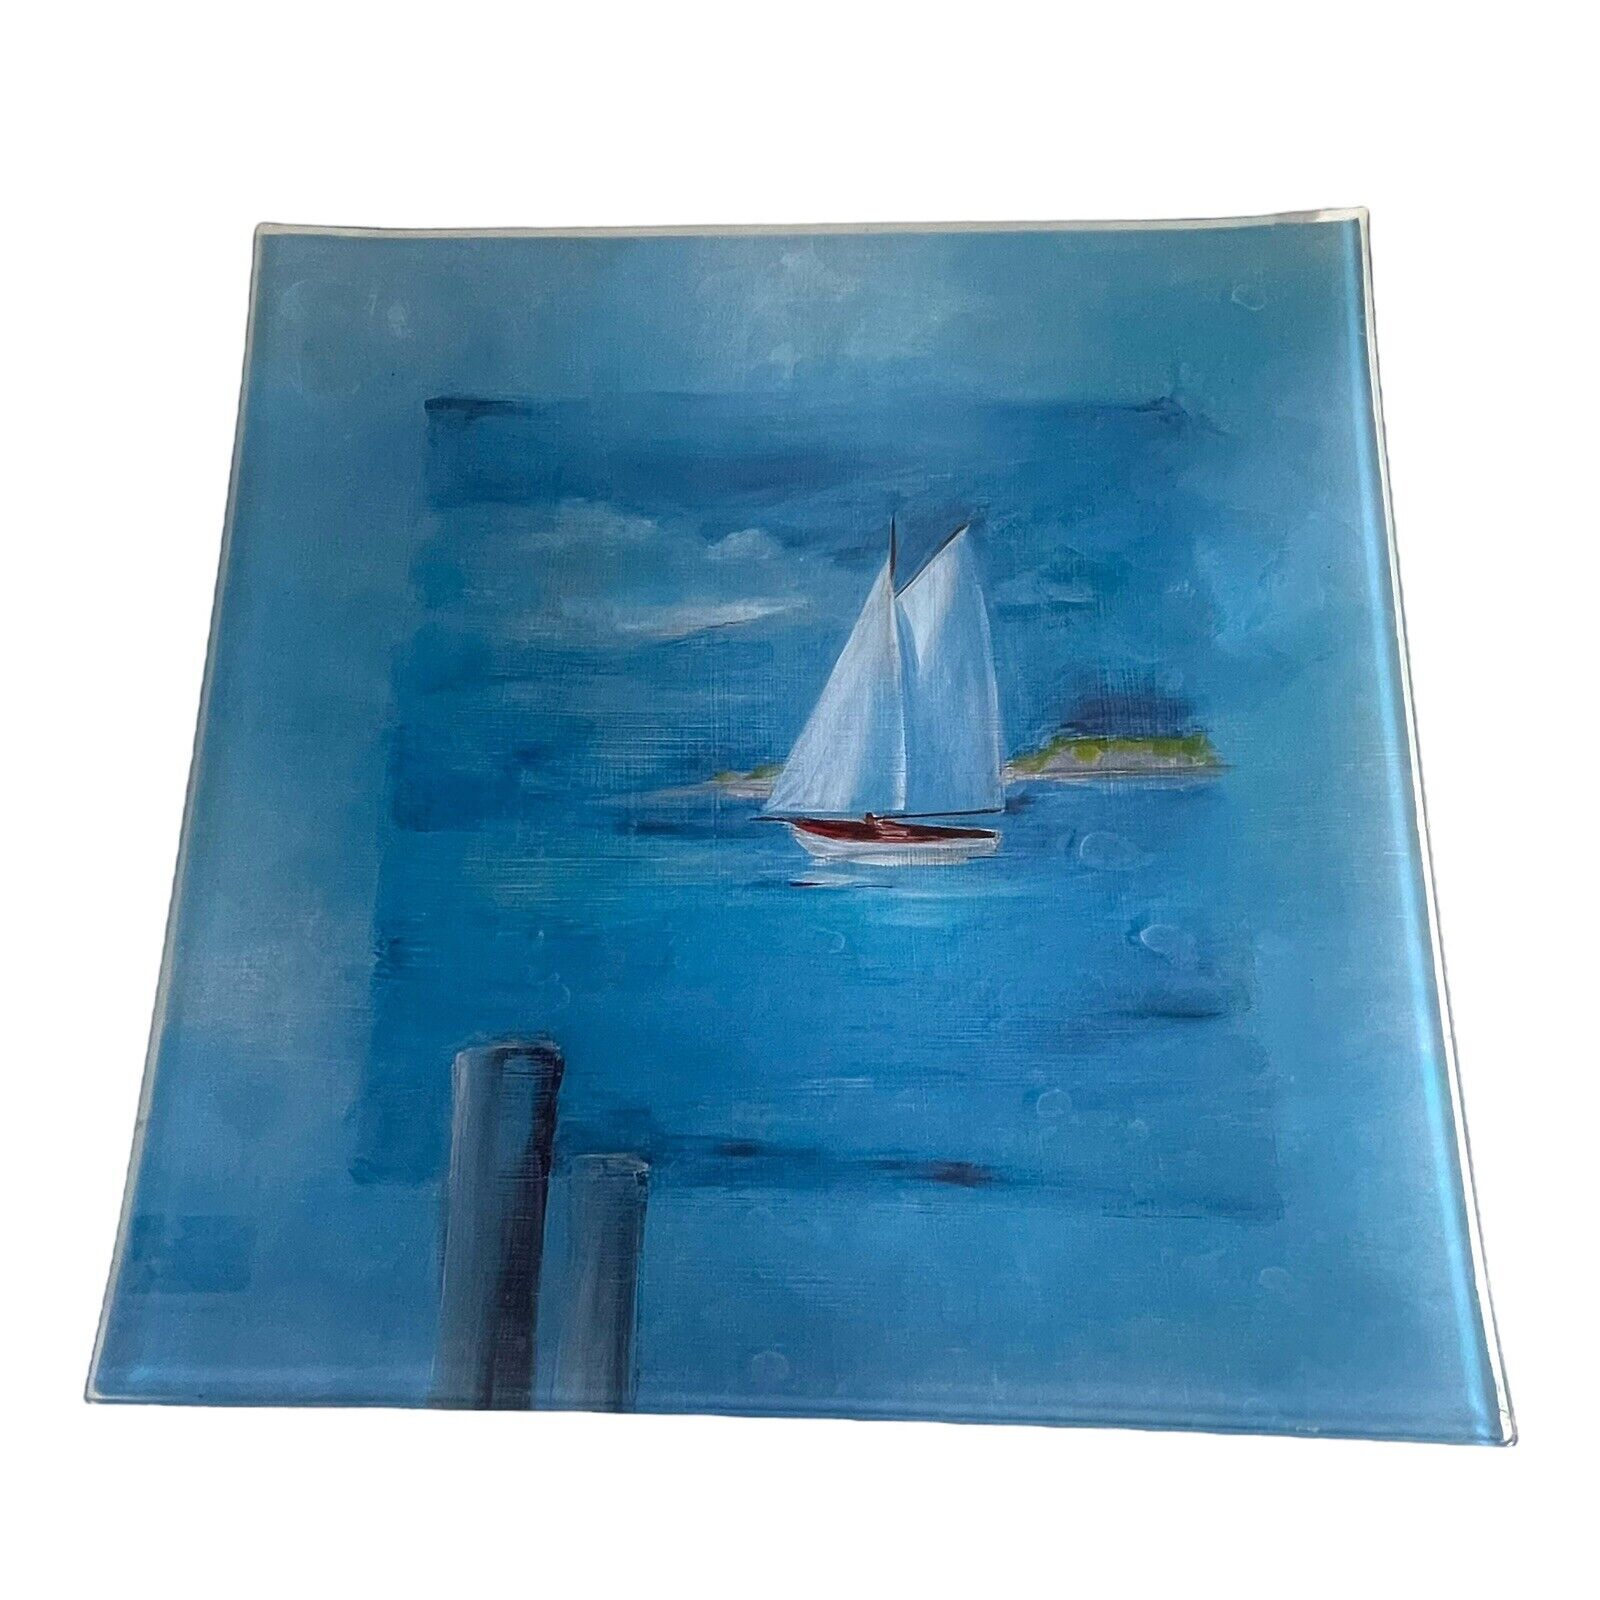 Paul Brent Thick Curved Glass Serving Platter 14” Reverse Painted Sailboat Scene